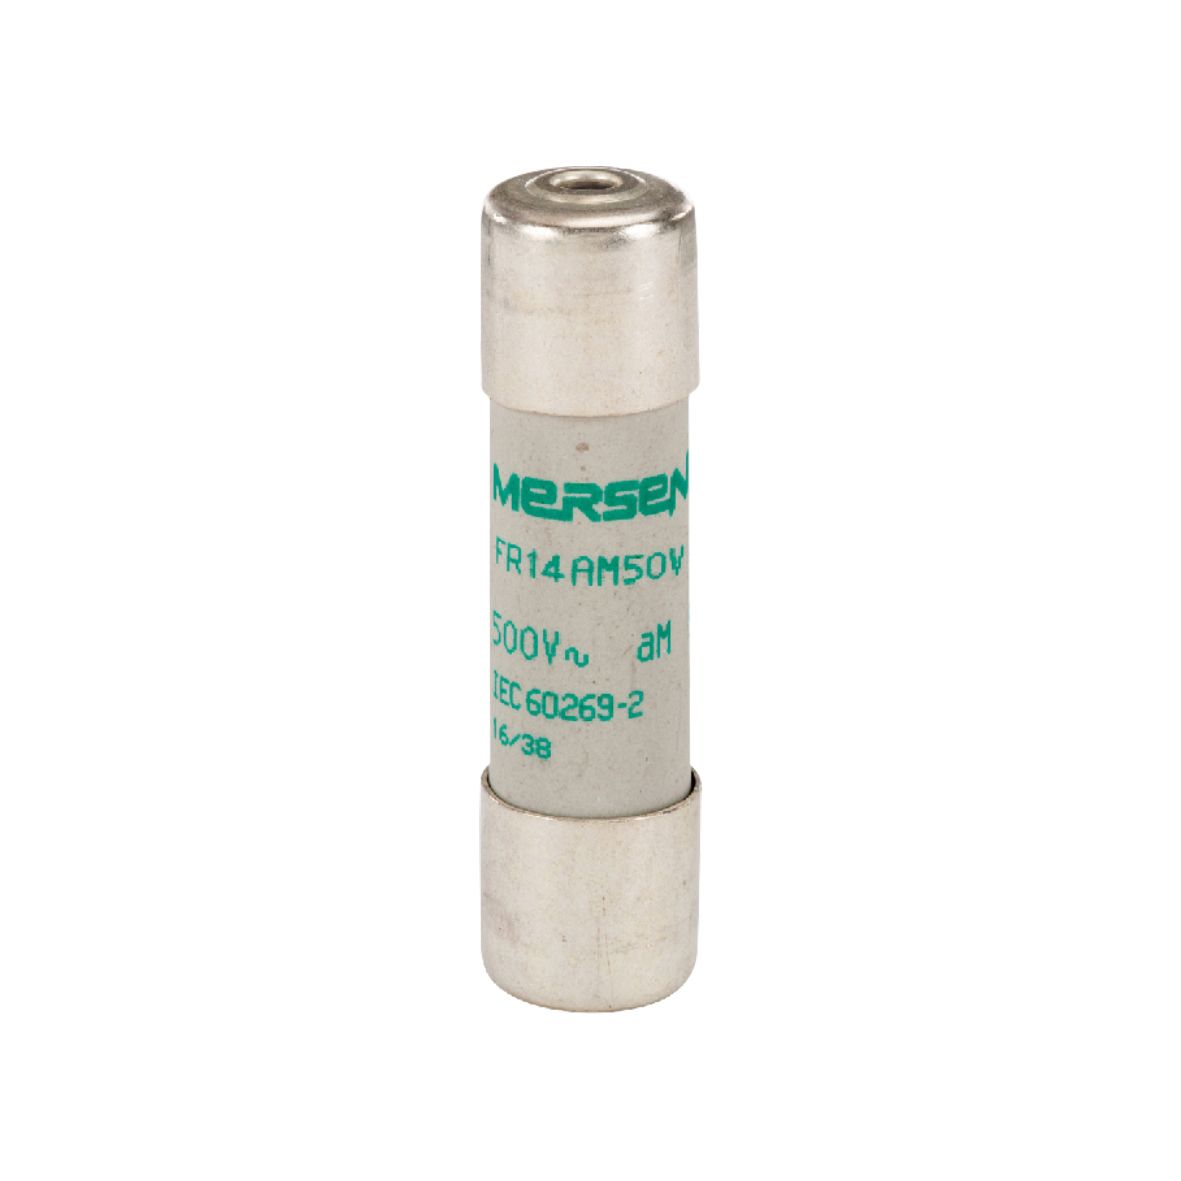 D218204 - Cylindrical fuse-link aM 500VAC 14.3x51, 50A with striker